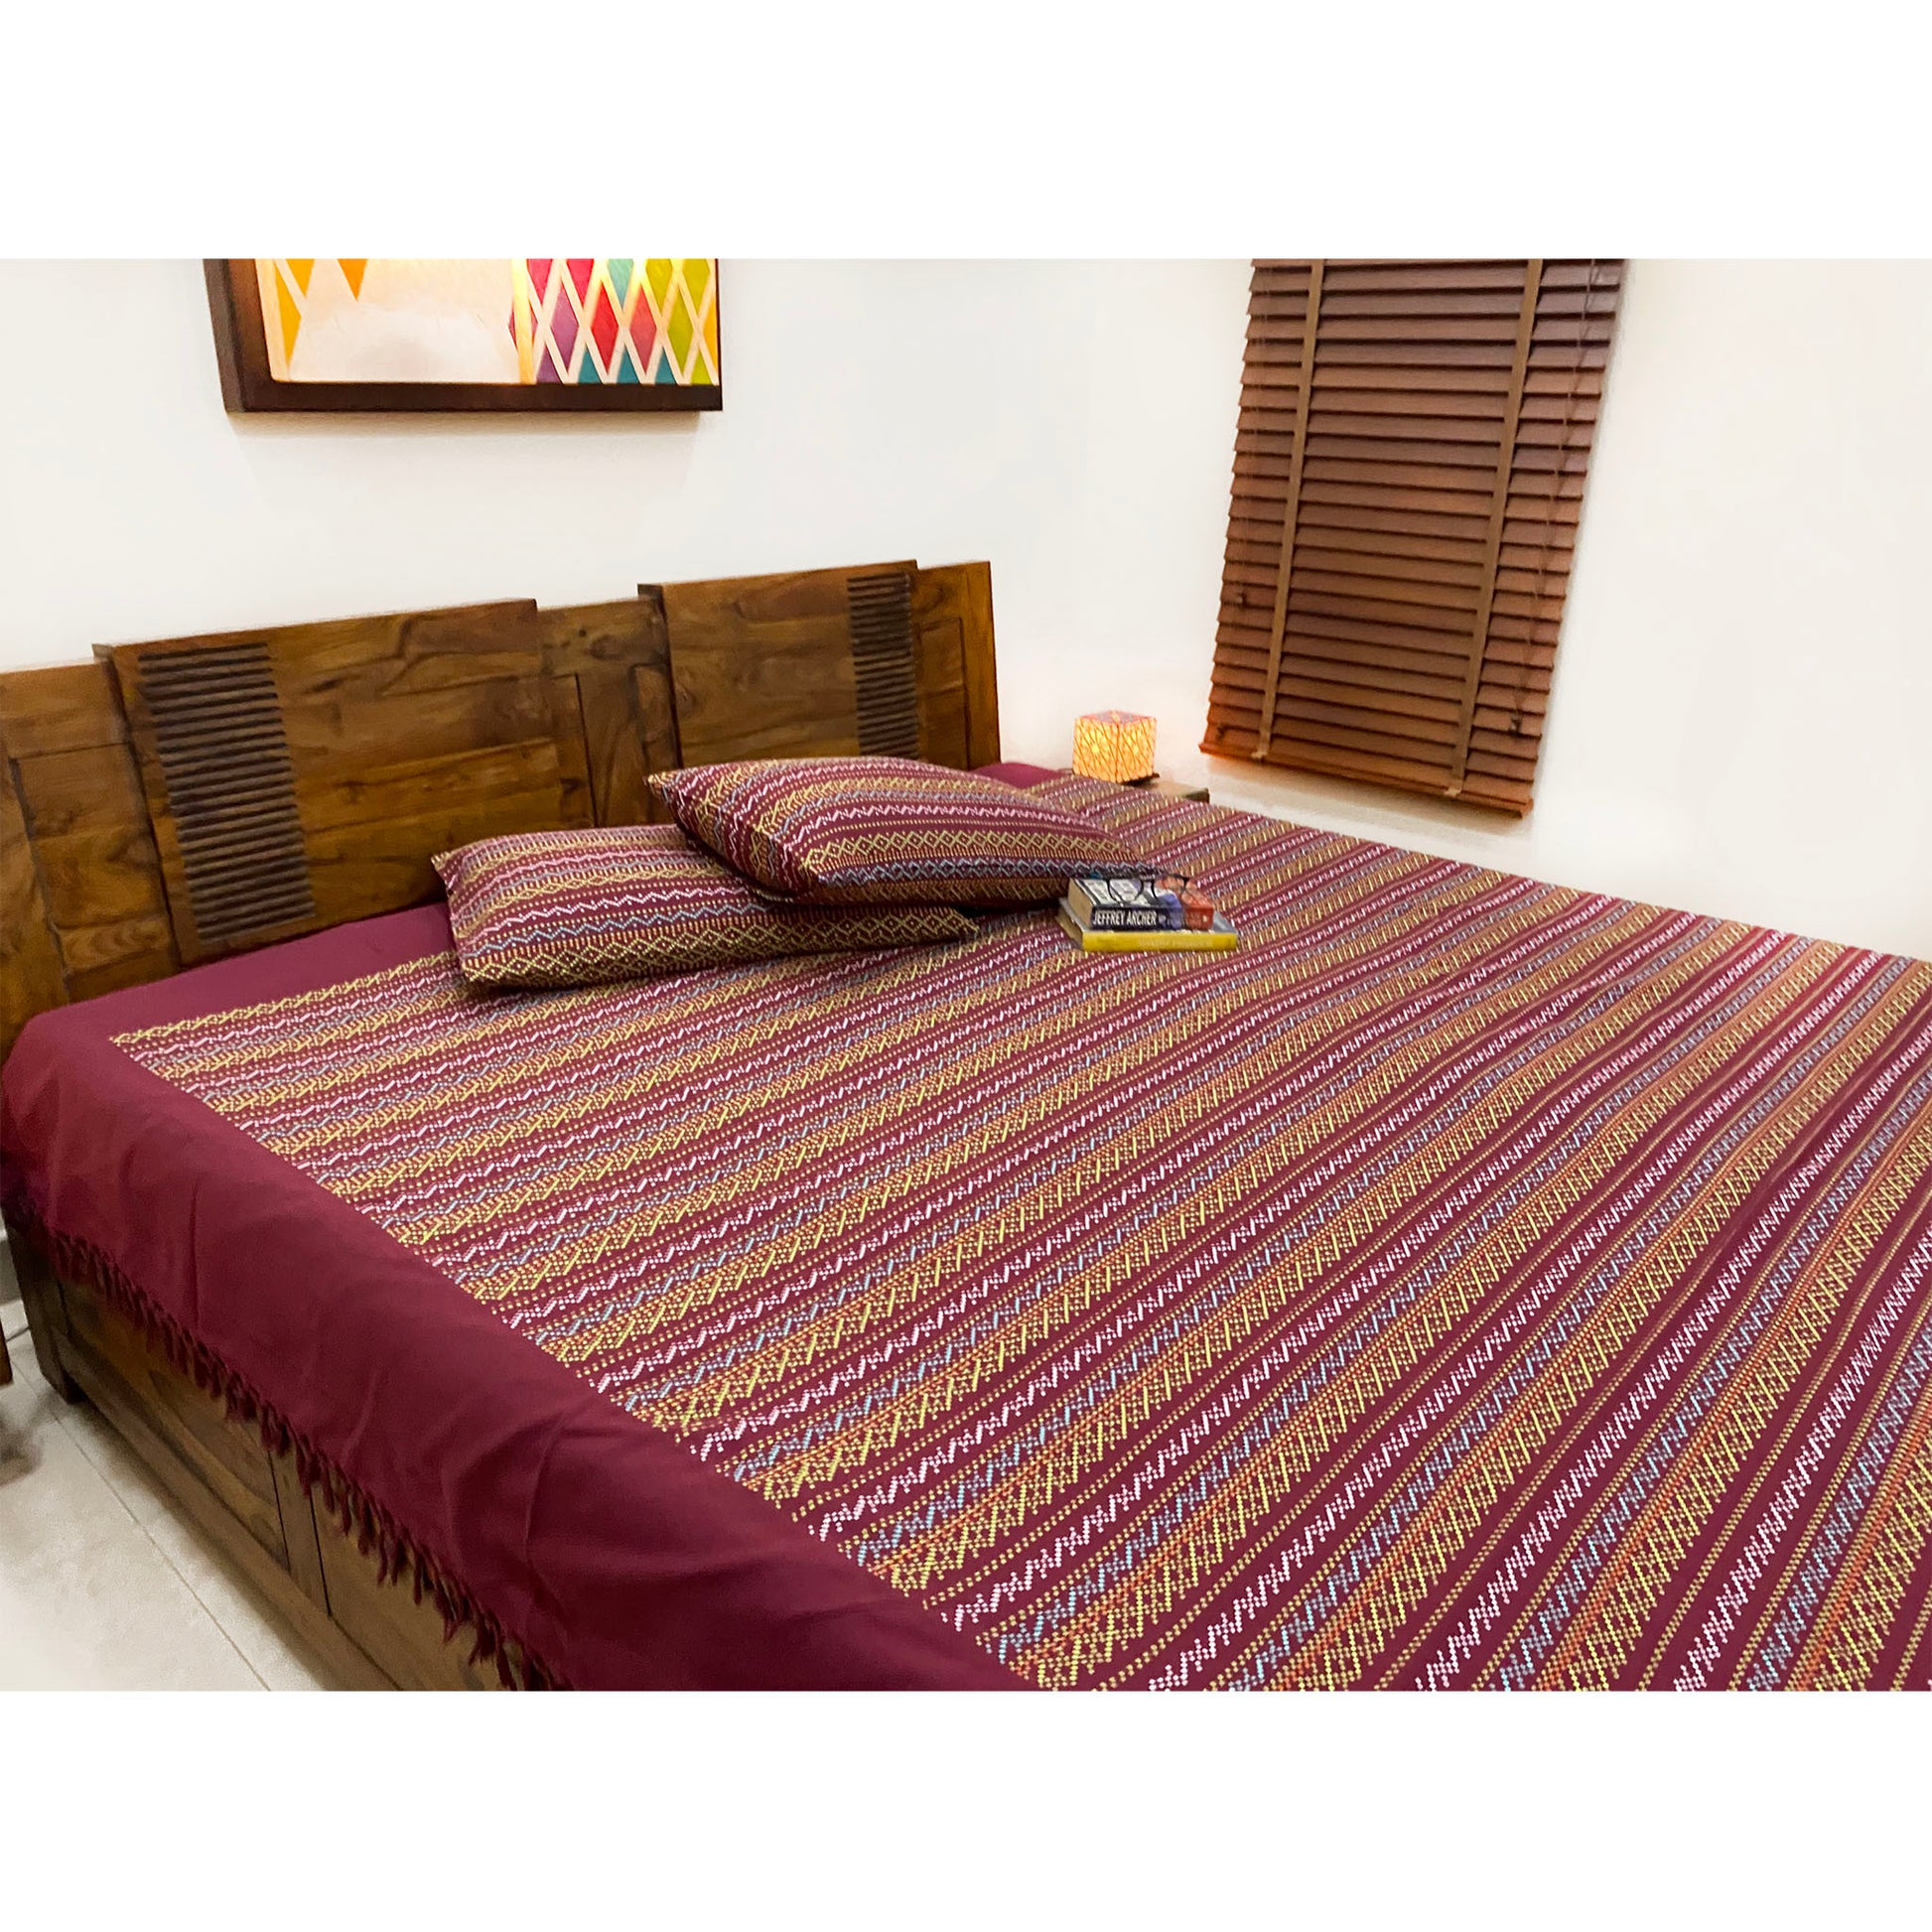 merlot-red-woven-bed-cover-with-pillow-cases